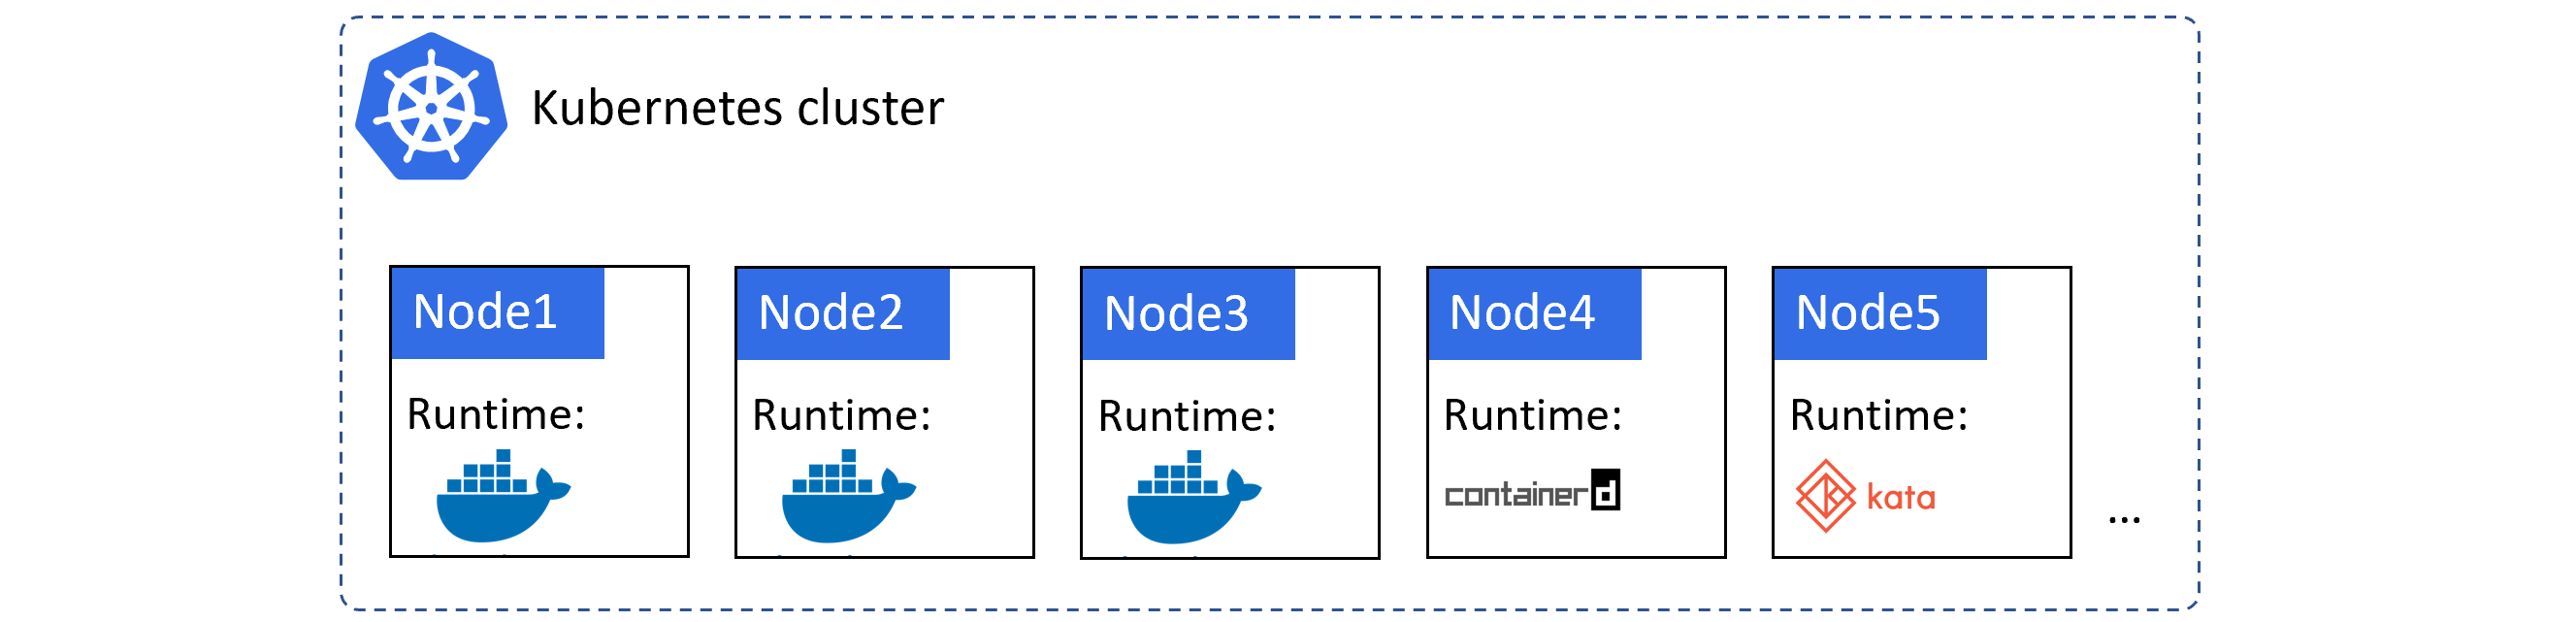 A simple Kubernetes cluster with some nodes using Docker as the container runtime